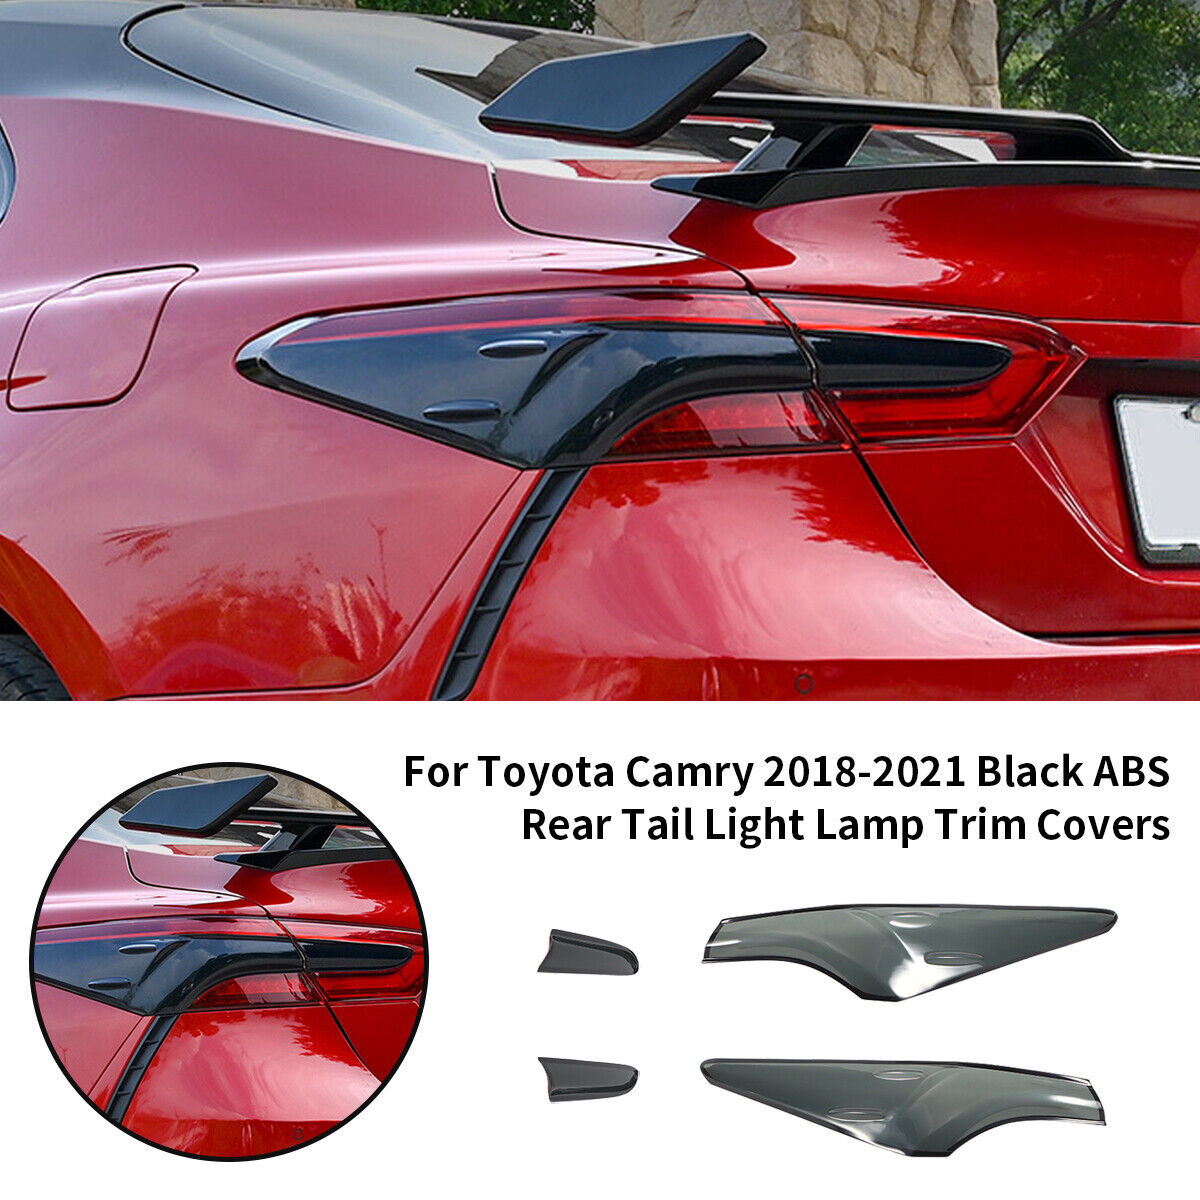 4pcs ABS Rear Tail Light Lamp Trim Cover For Toyota Camry 2018-2021 Smoke black